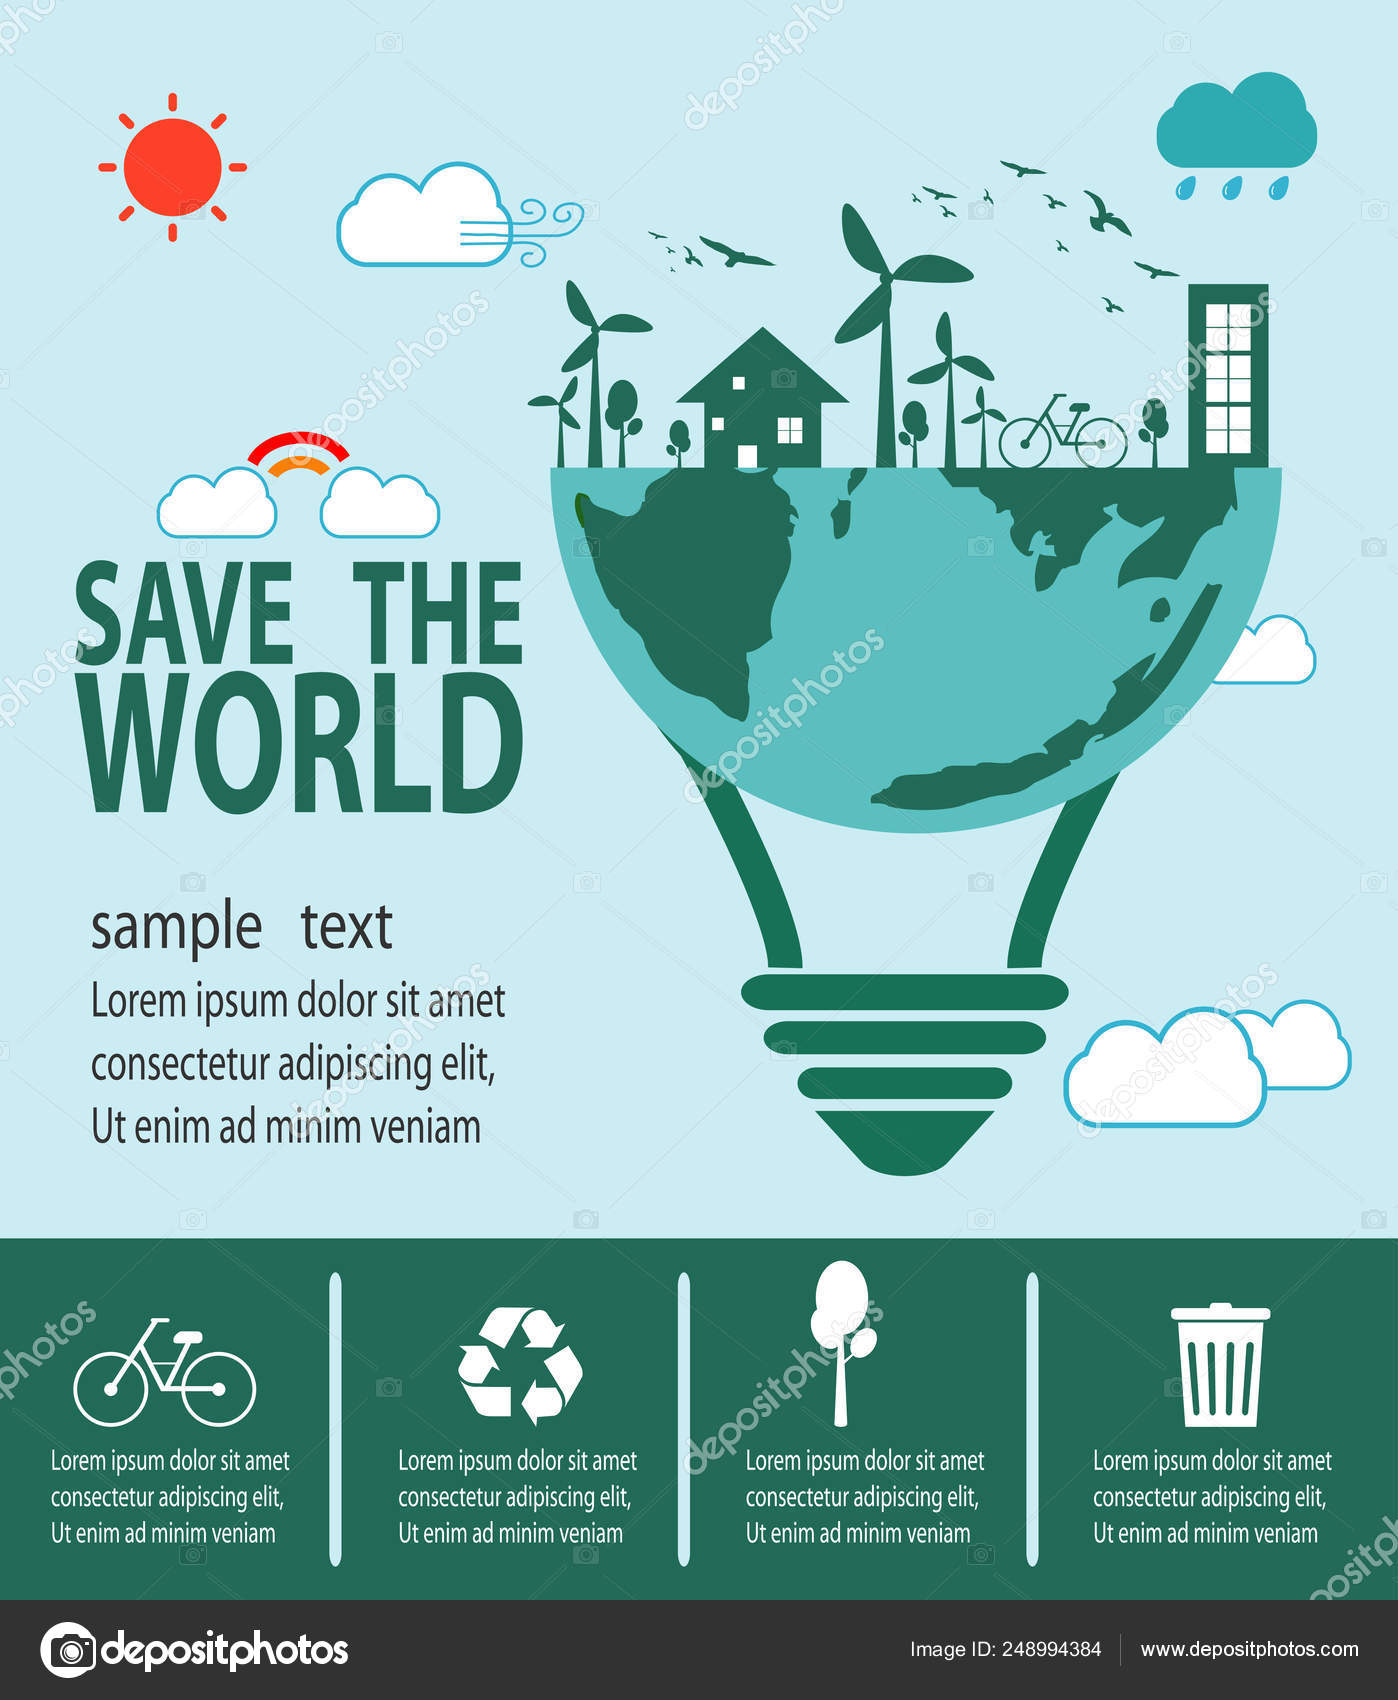 Infographic of conserving environment Vector Image - 1314314 | StockUnlimited